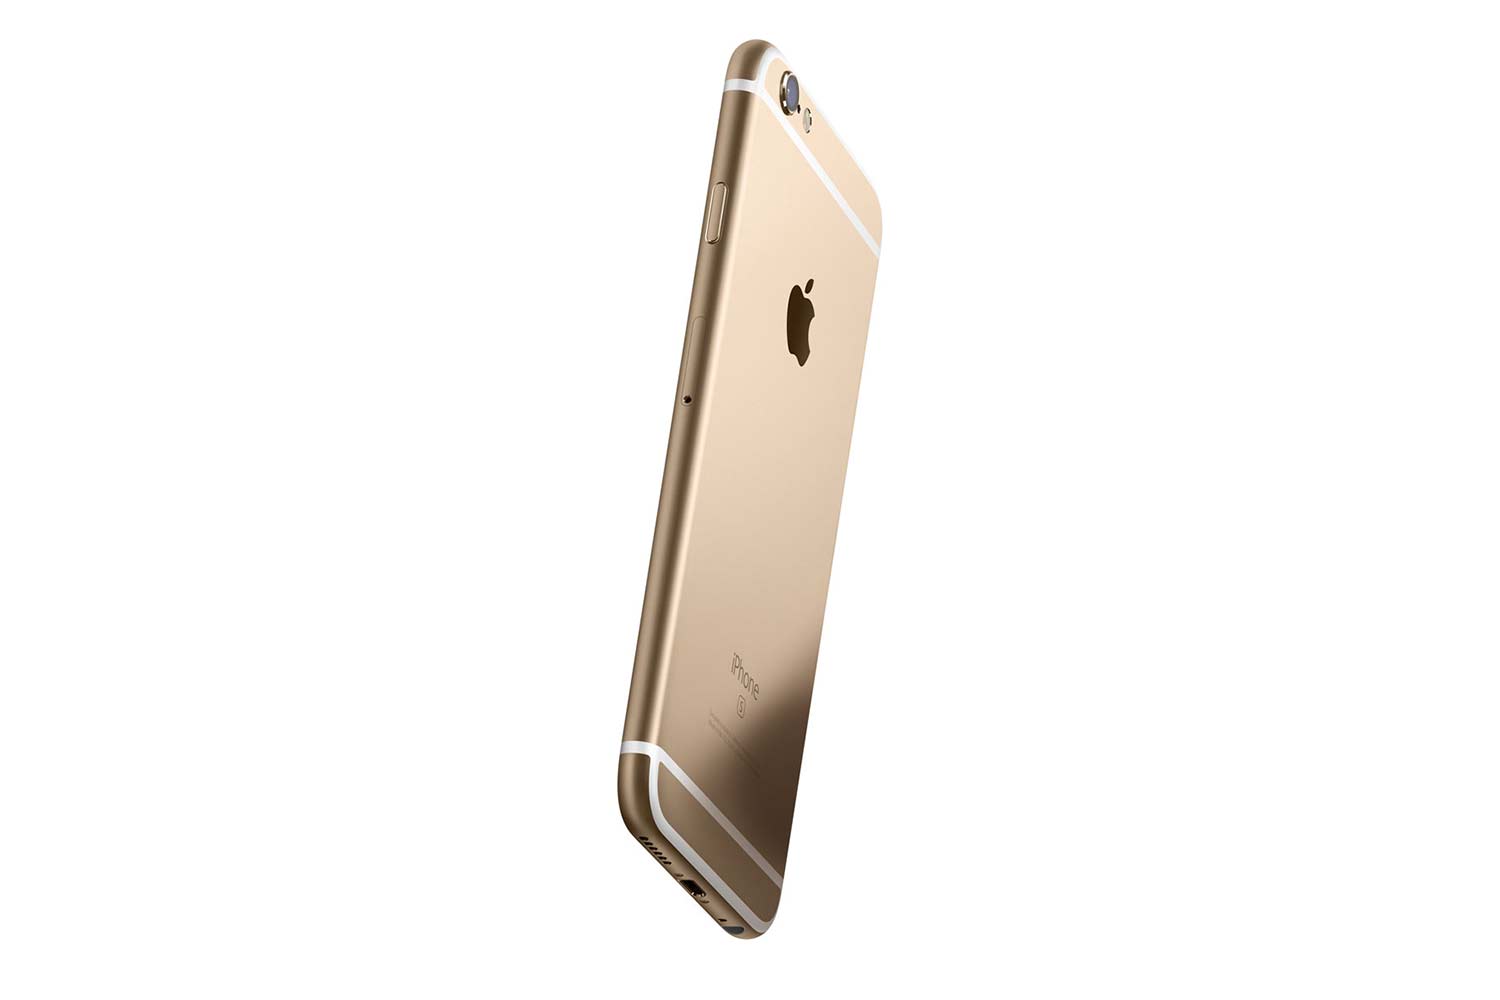 iphone 6s news detail back large